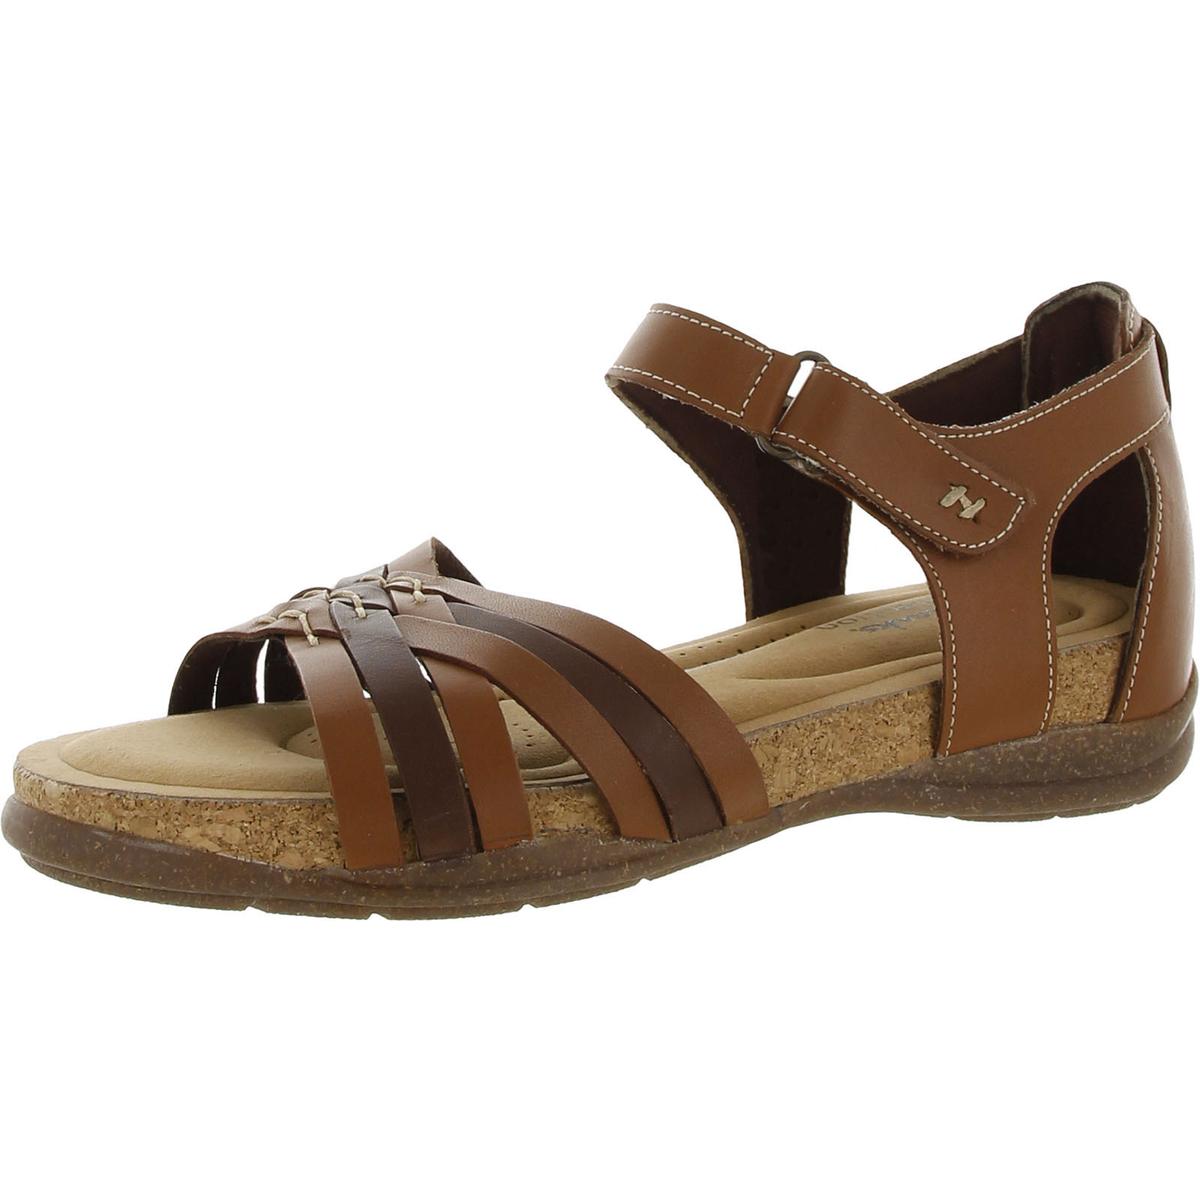 Clarks Womens Roseville Cove Leather Comfort Wedge Sandals Shoes BHFO ...